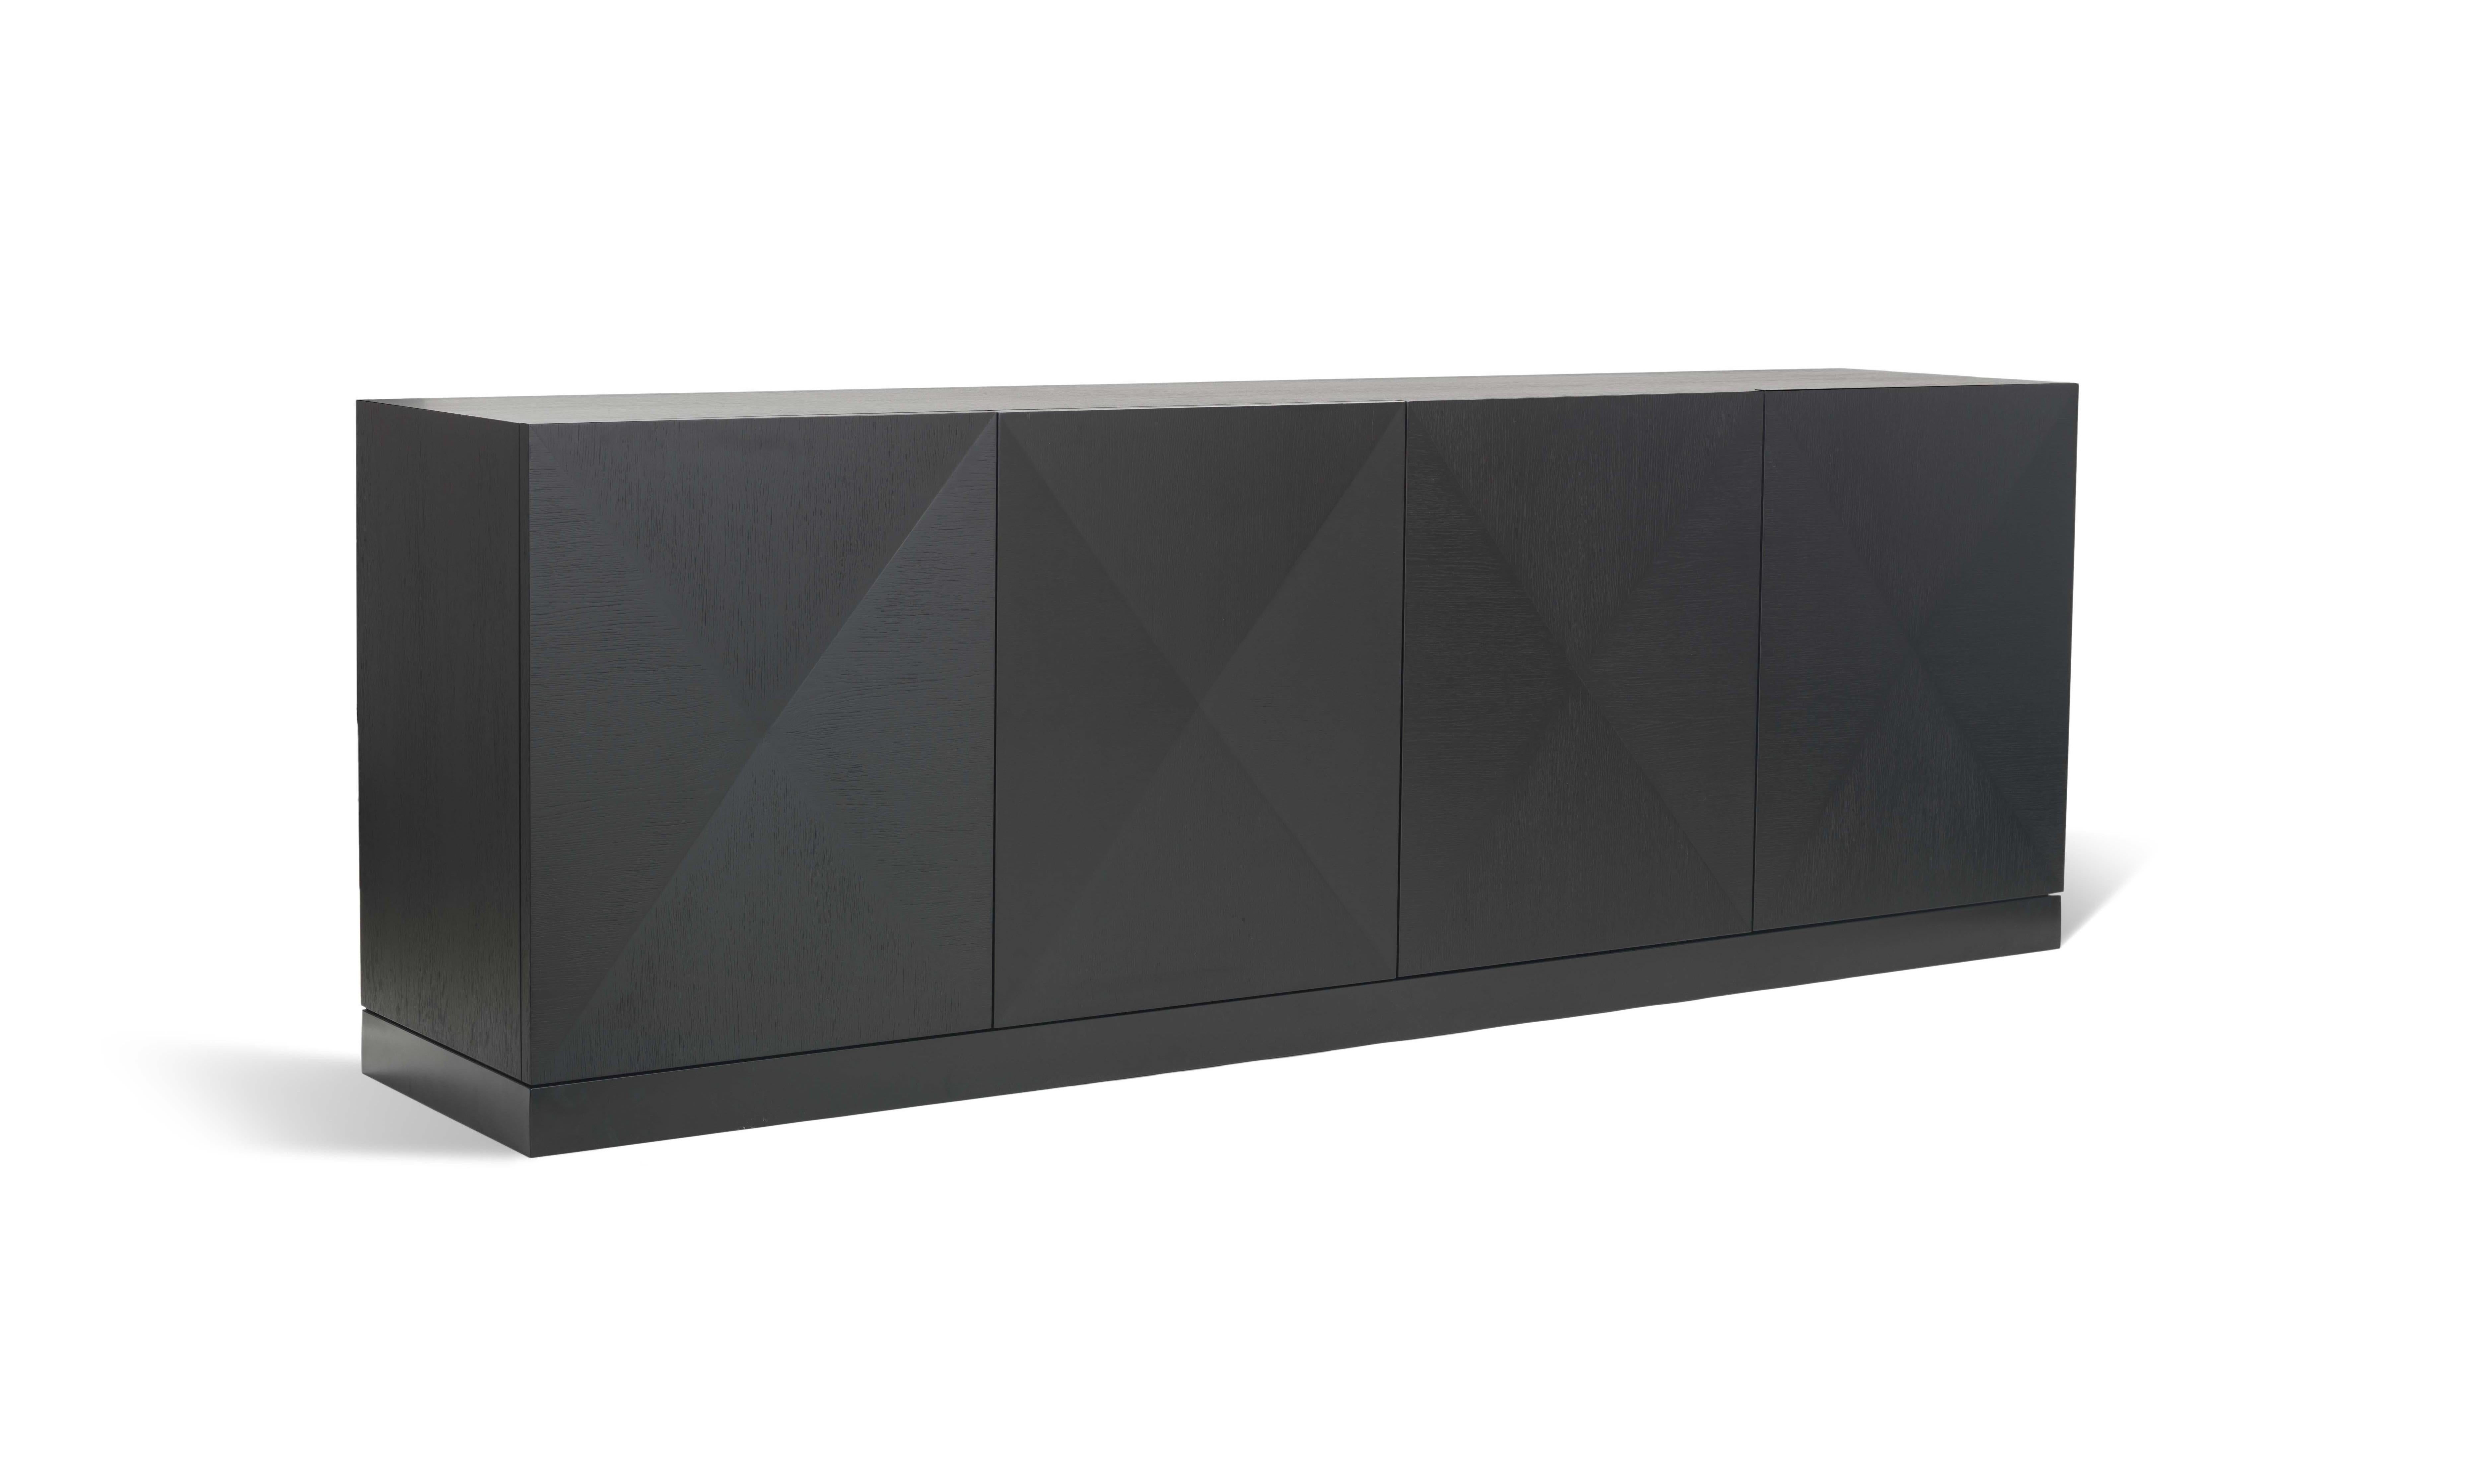 The discrete and geometric form characterizes the versatility of the Fade to Black sideboard. Black is celebrated in its greater simplicity through the mix of black oak with black lacquered iron. Its modern yet timeless design makes this piece a